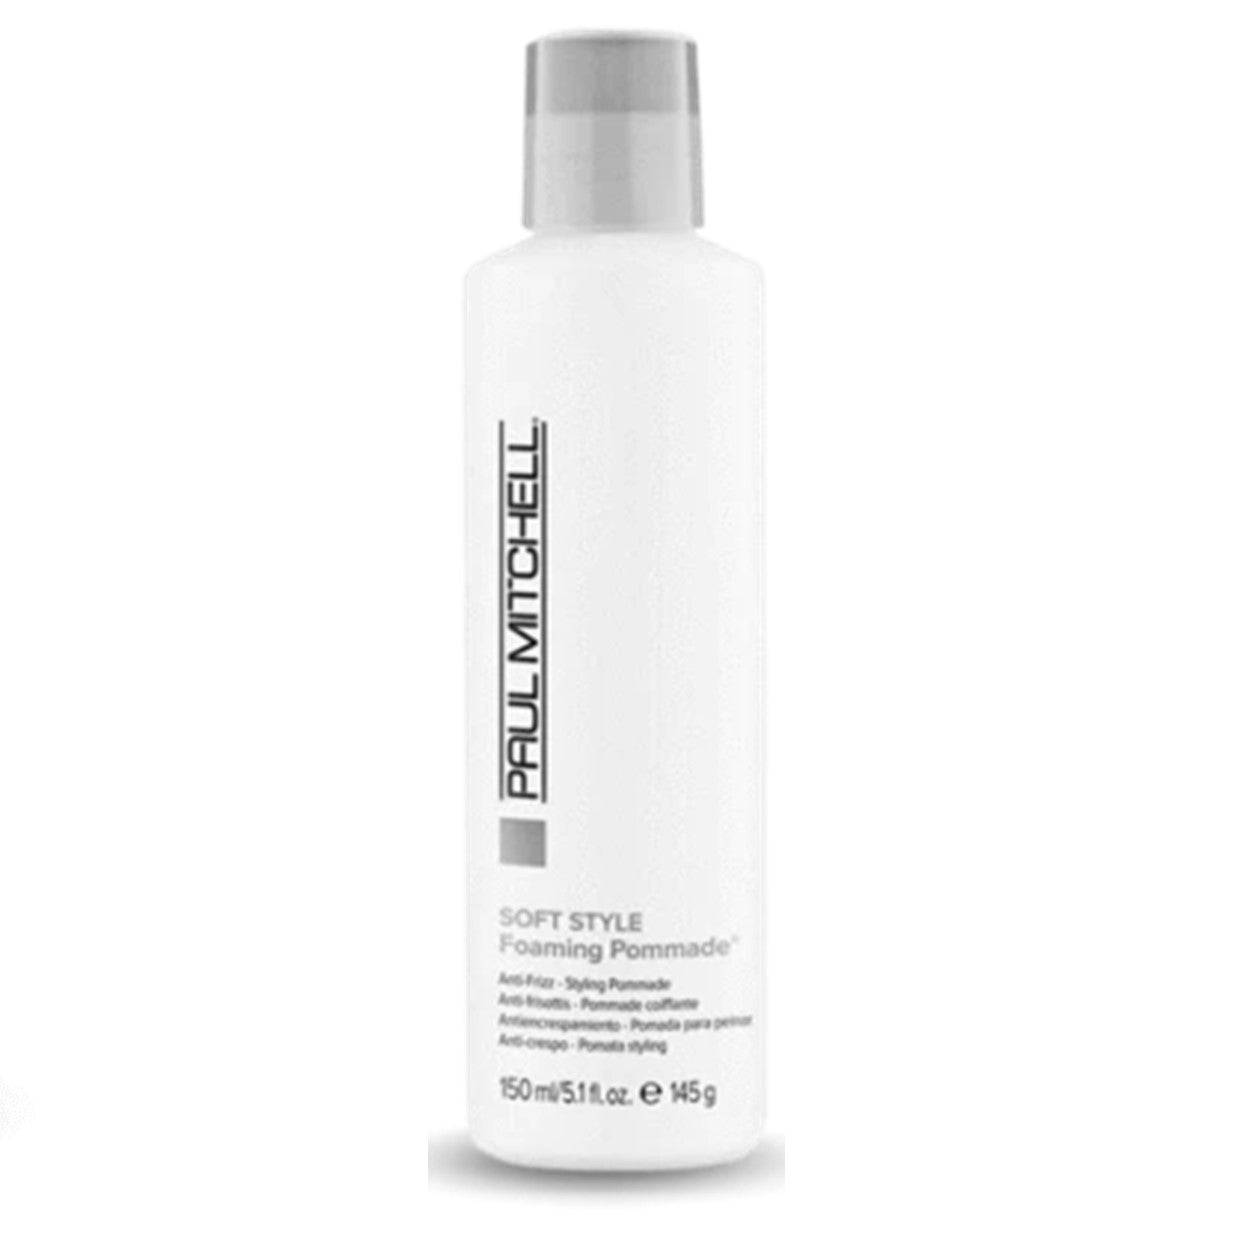 Paul Mitchell Foaming Pomade 150ml - On Line Hair Depot